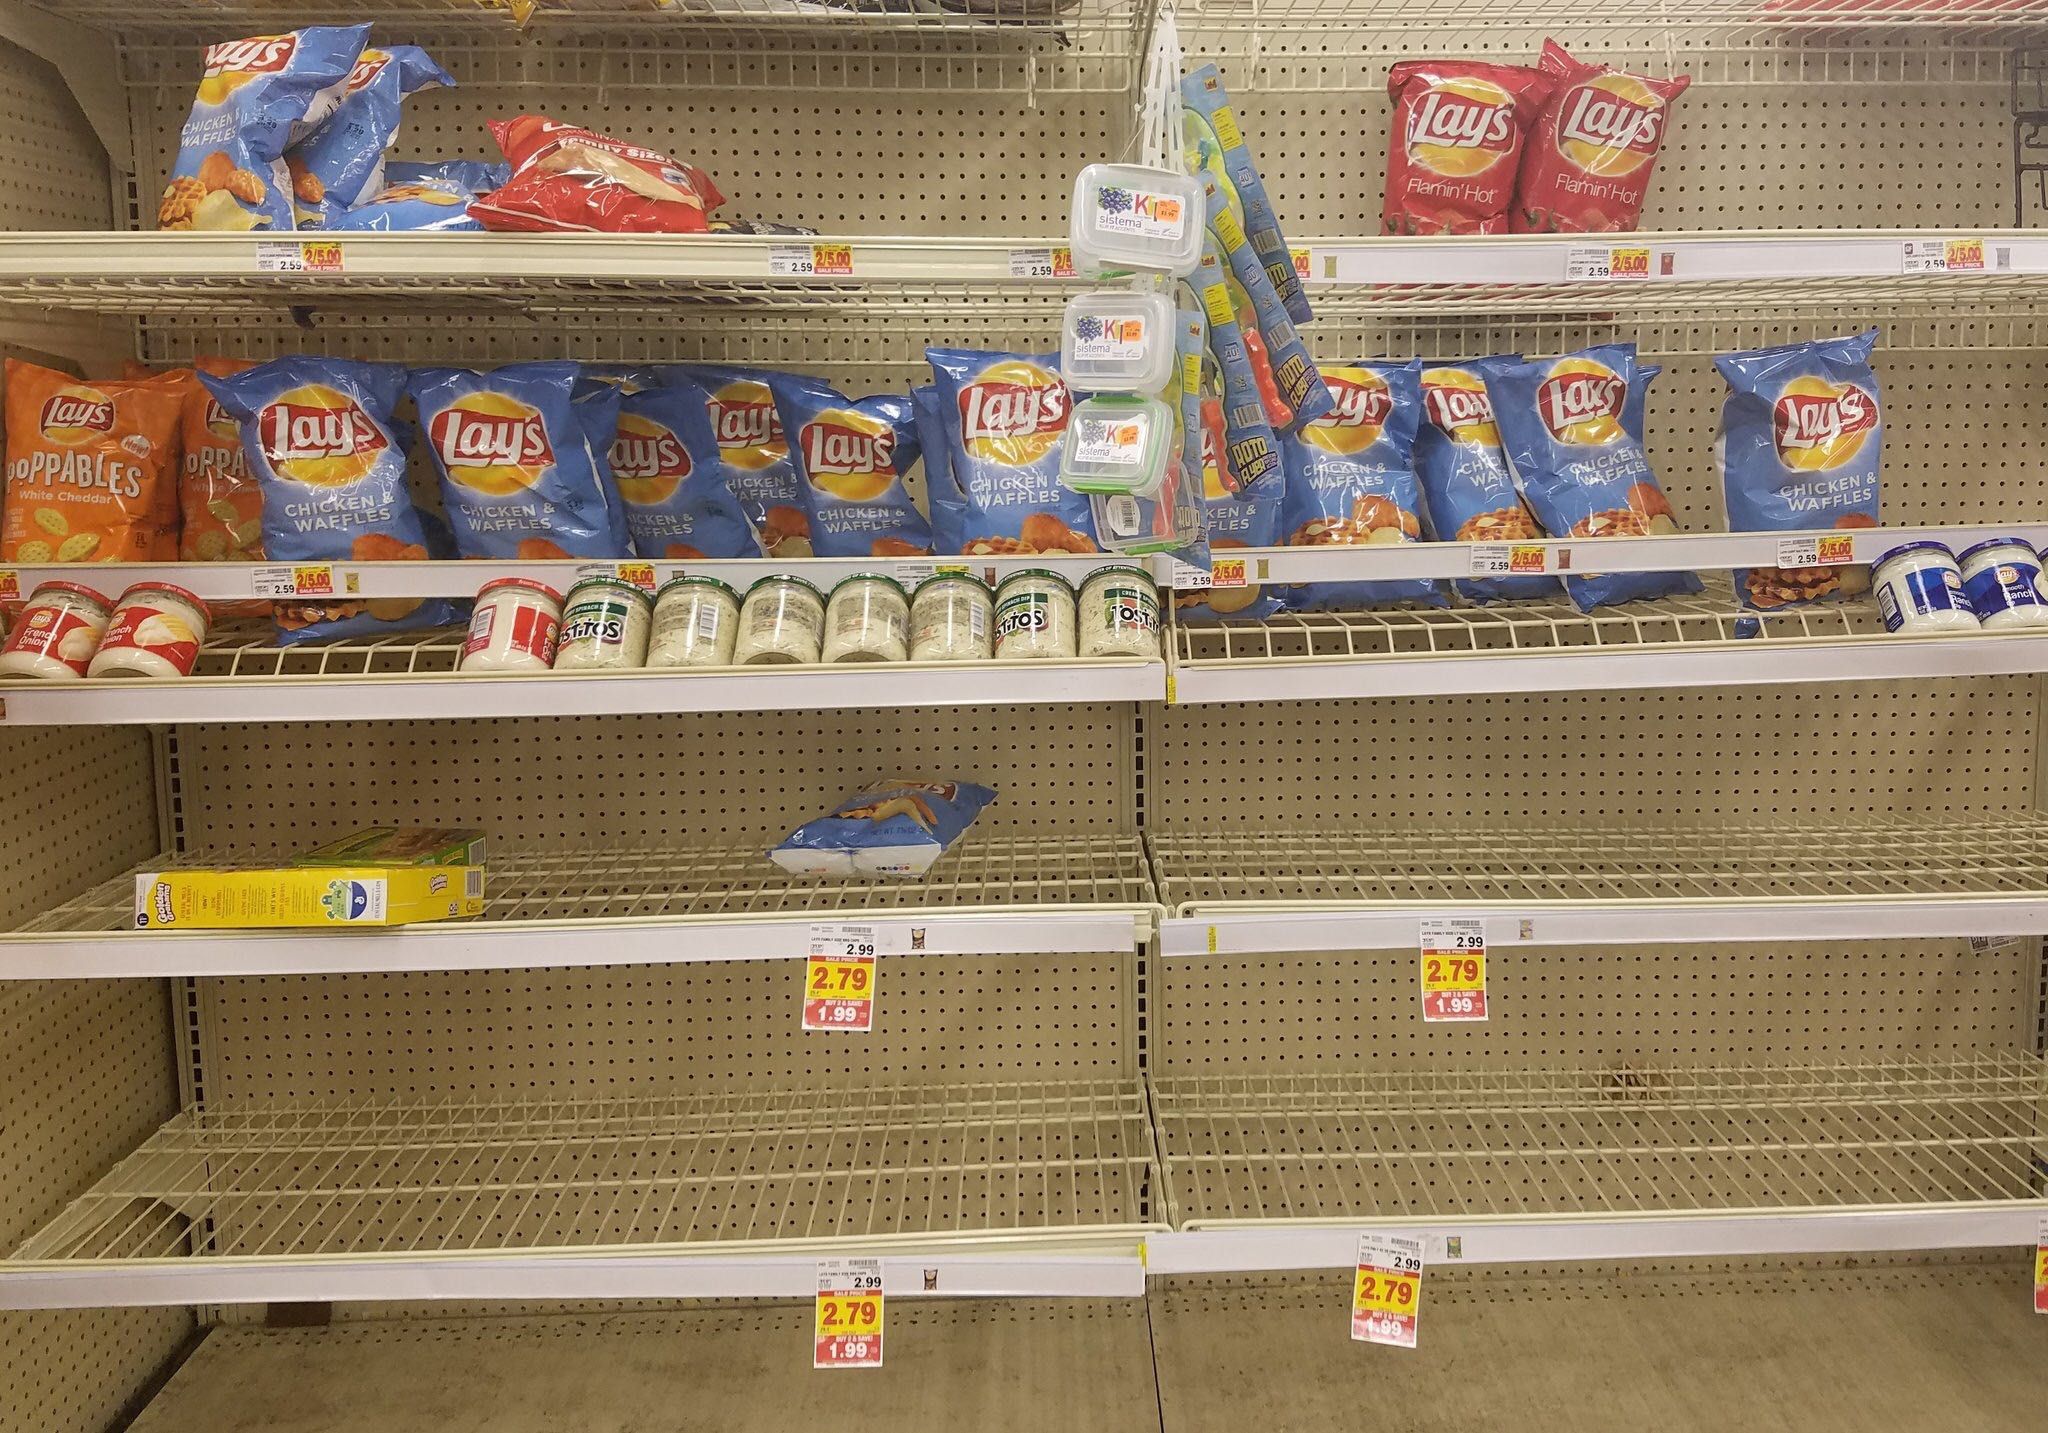 People at the store in Houston would rather starve during Hurricane Harvey than eat chicken and waffle Lay's